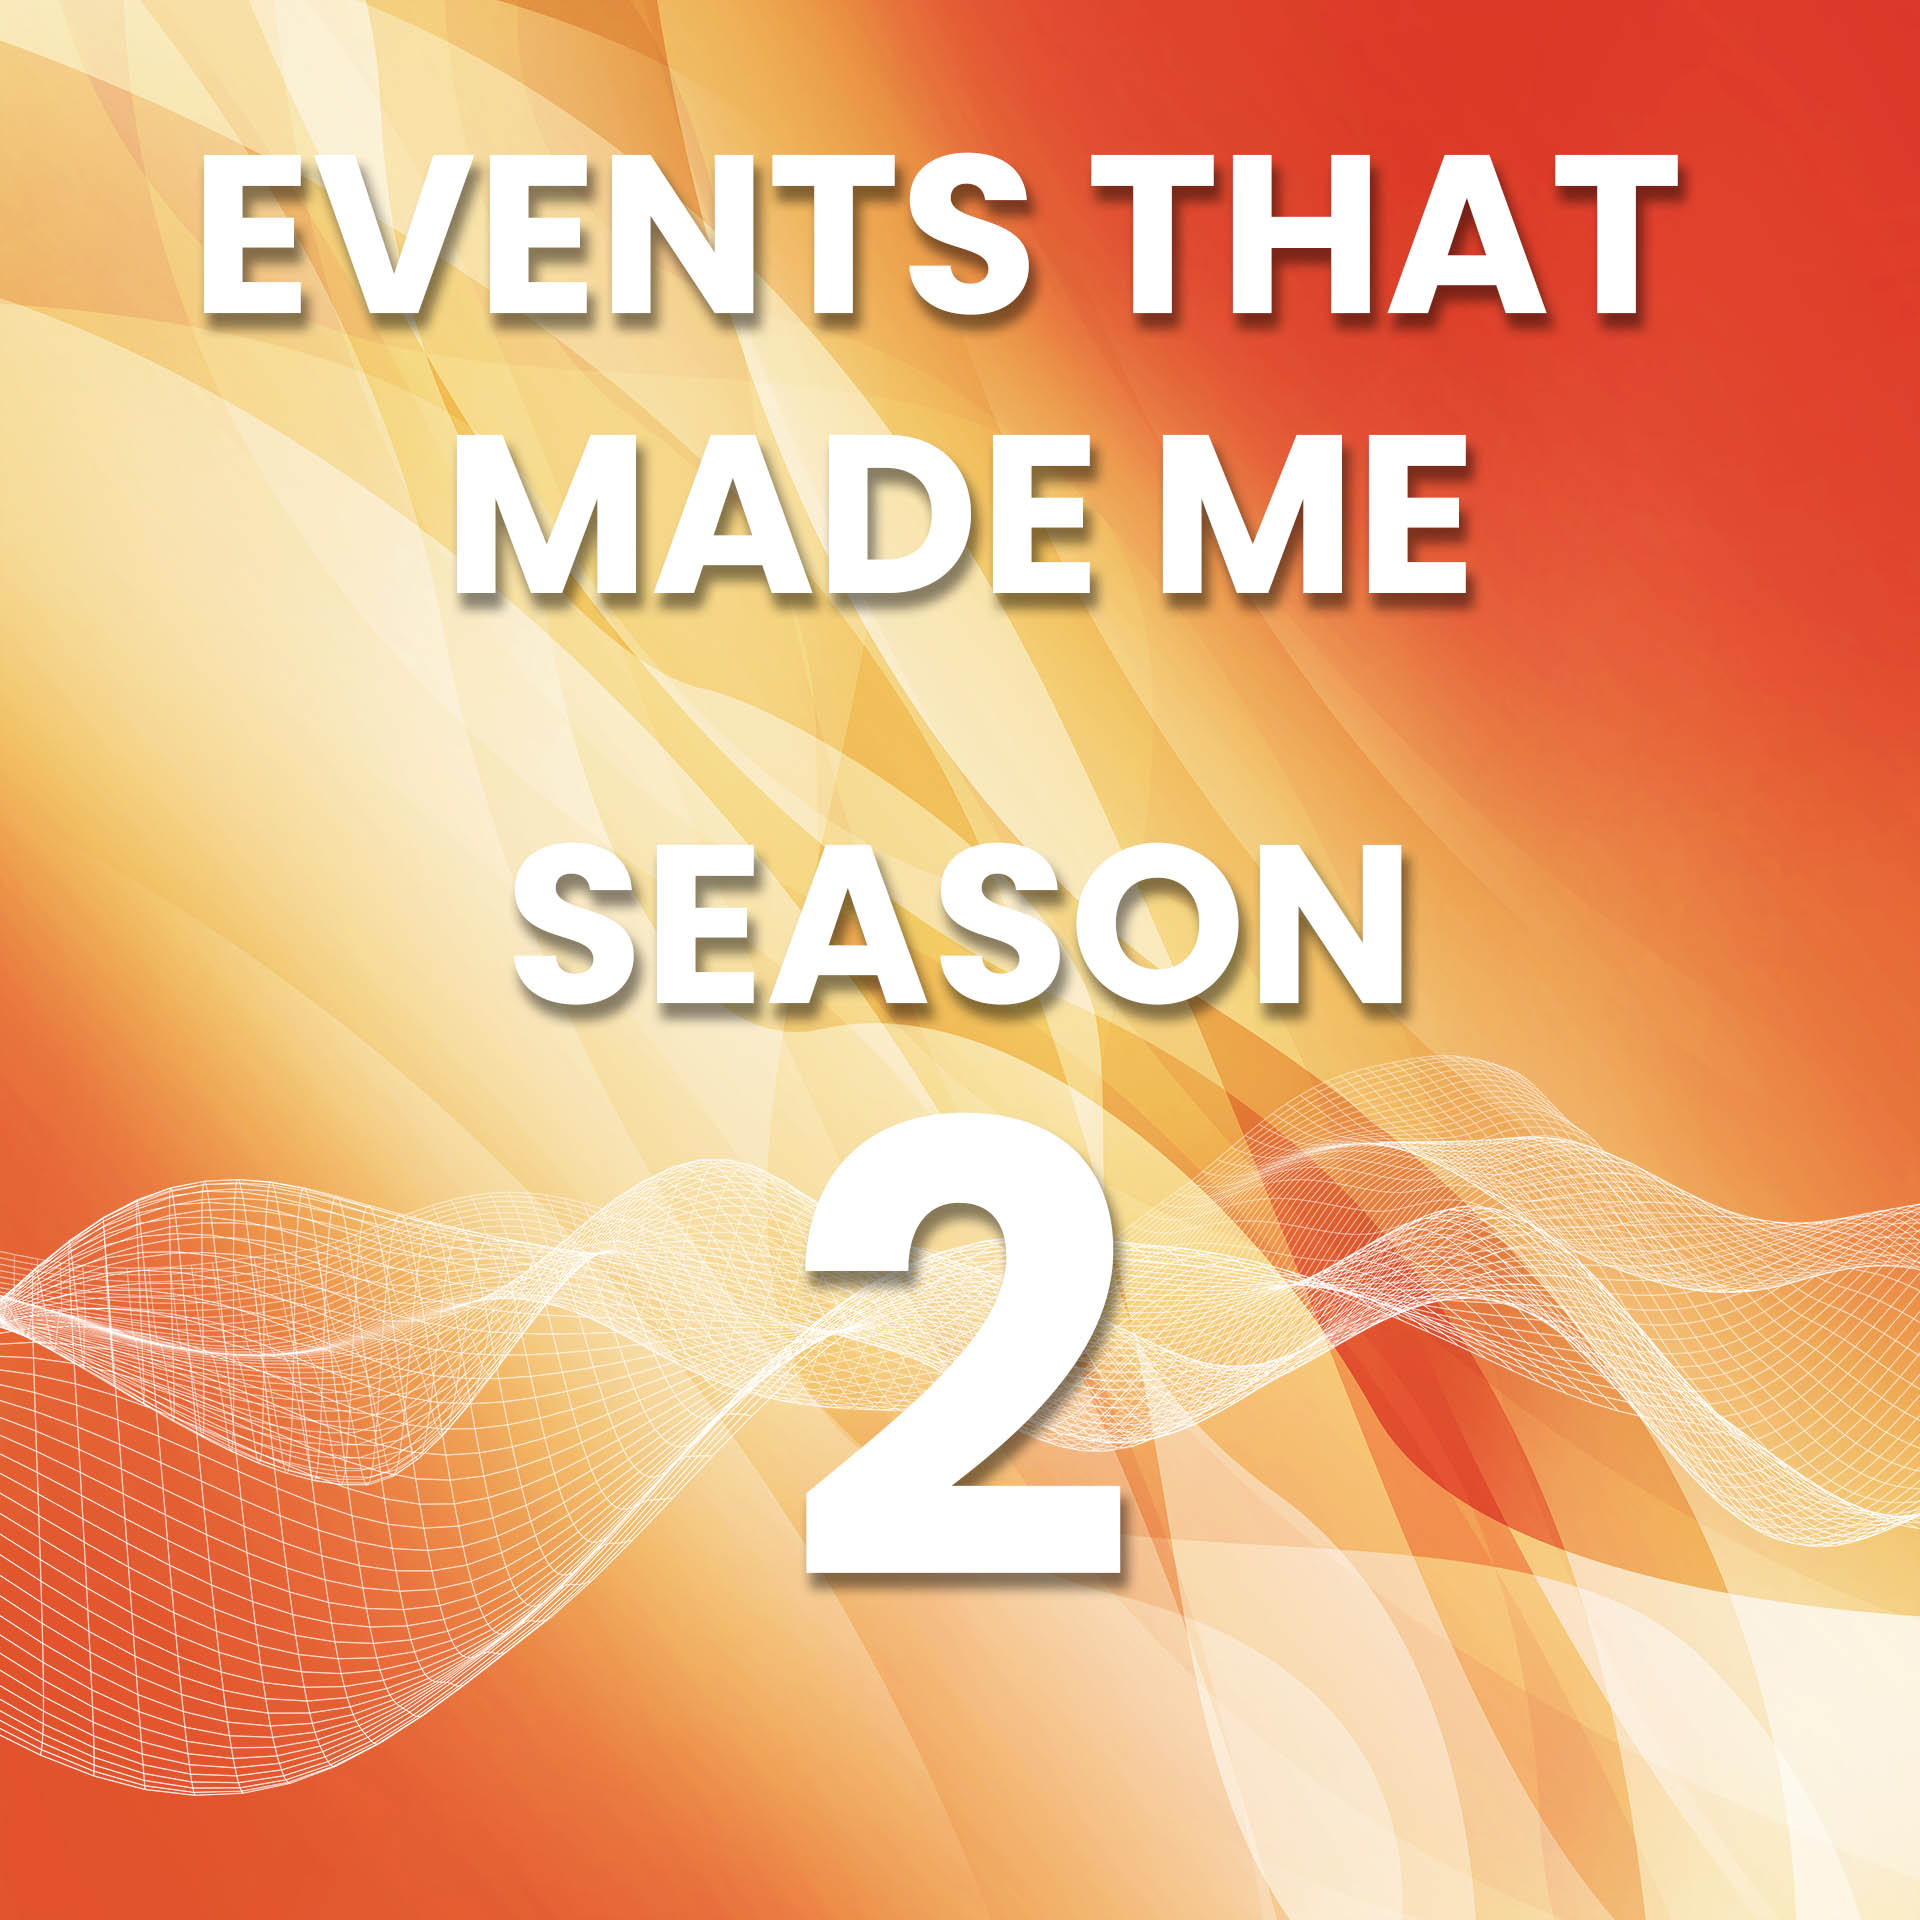 Events that Made Me Season 2